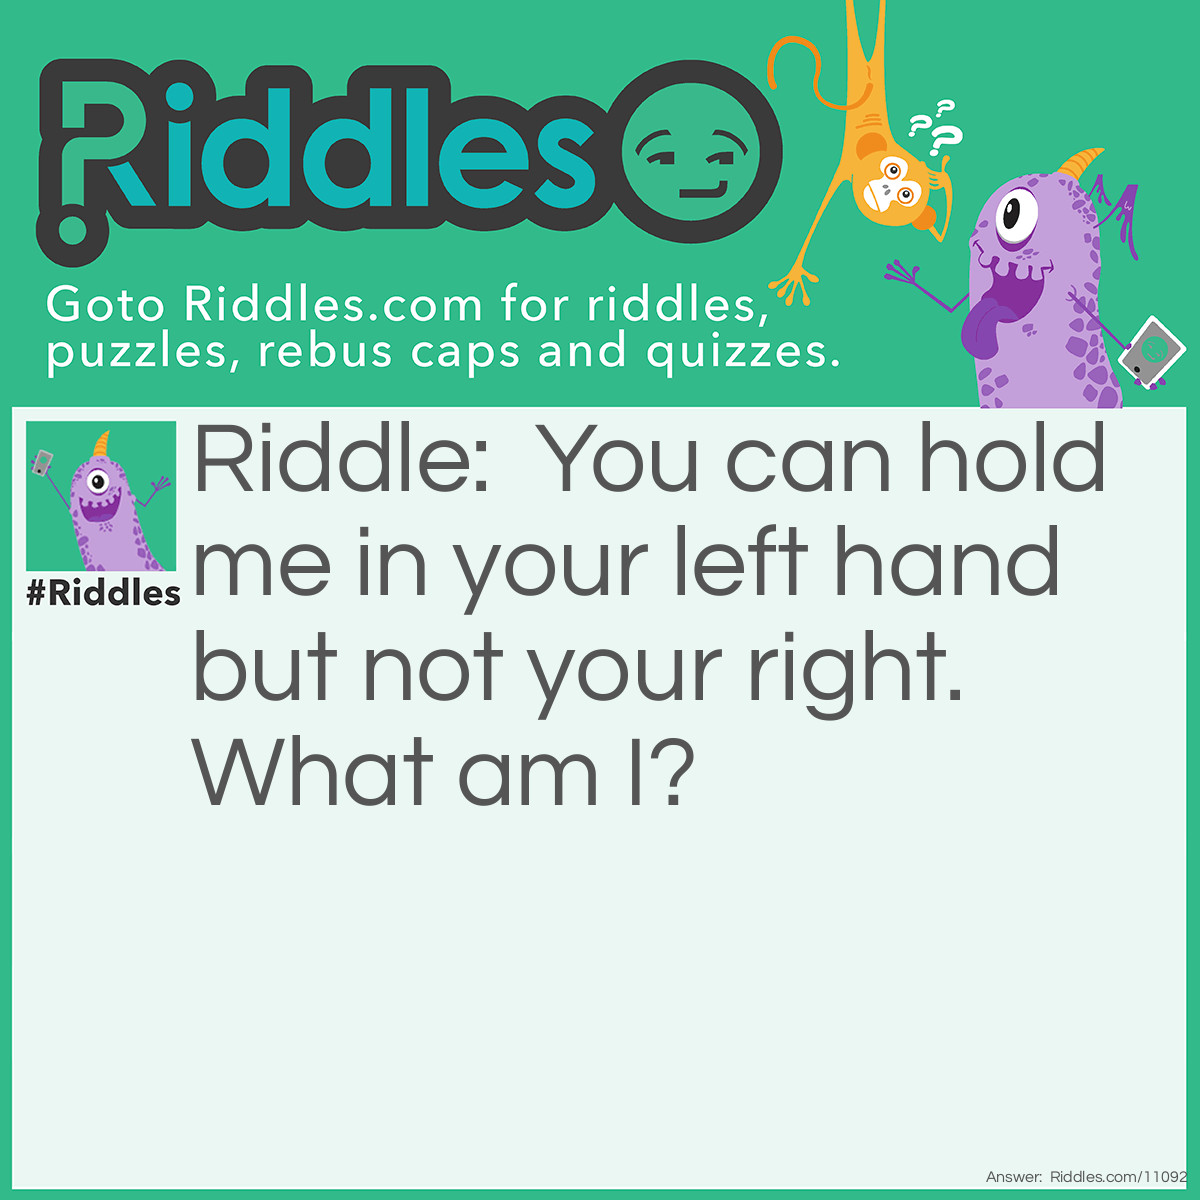 Riddle: You can hold me in your left hand but not your right. What am I? Answer: Your right elbow.